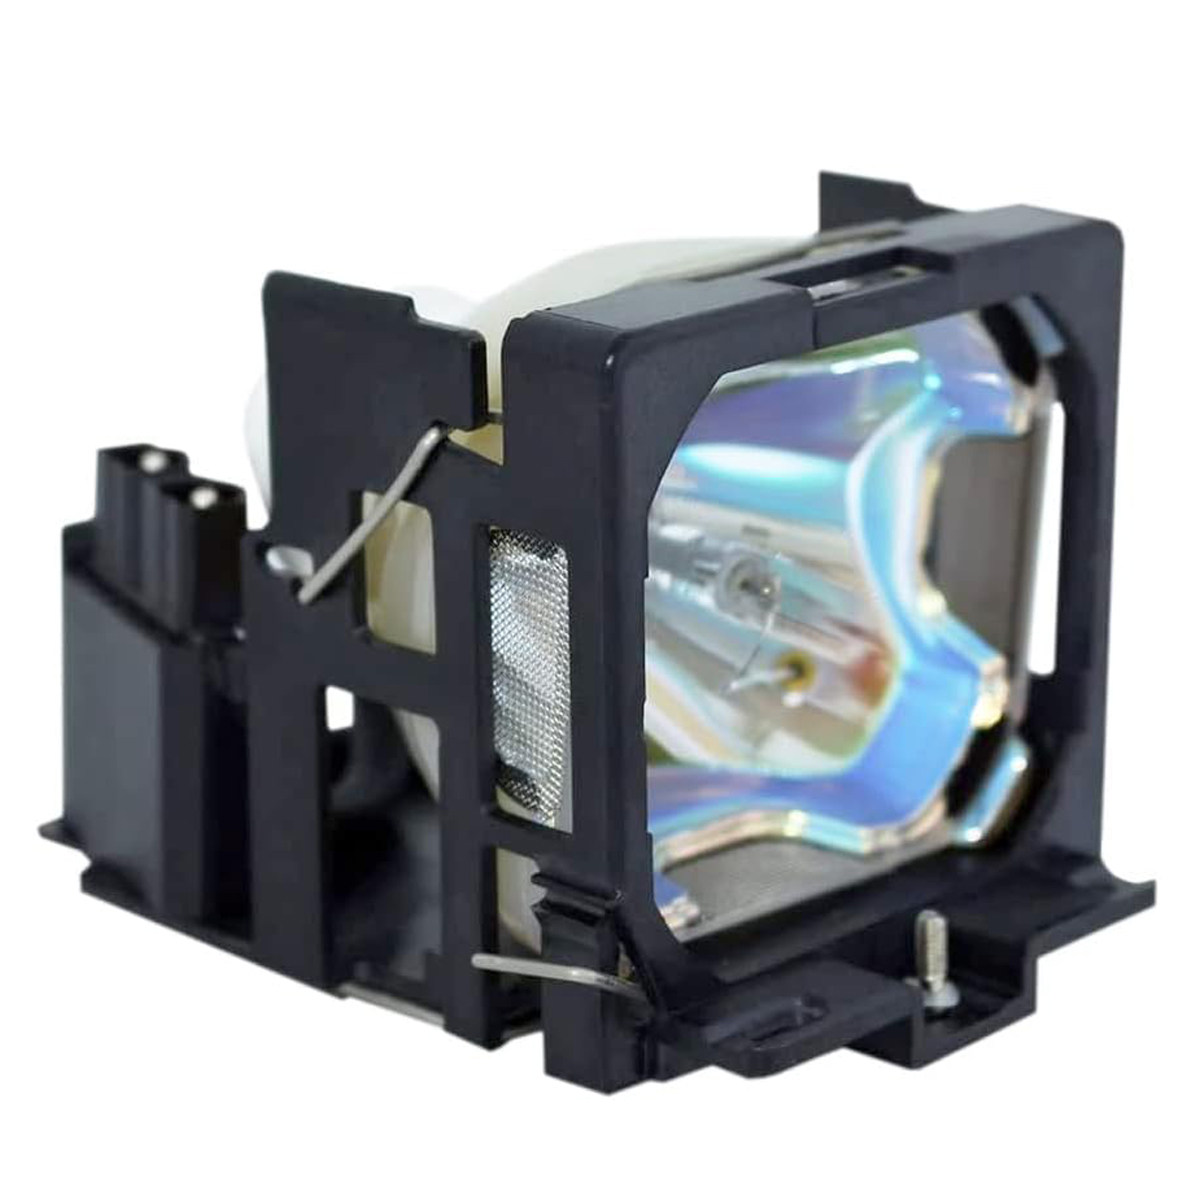 Replacement Projector lamp LMP-C160 For SONY VPL CX11